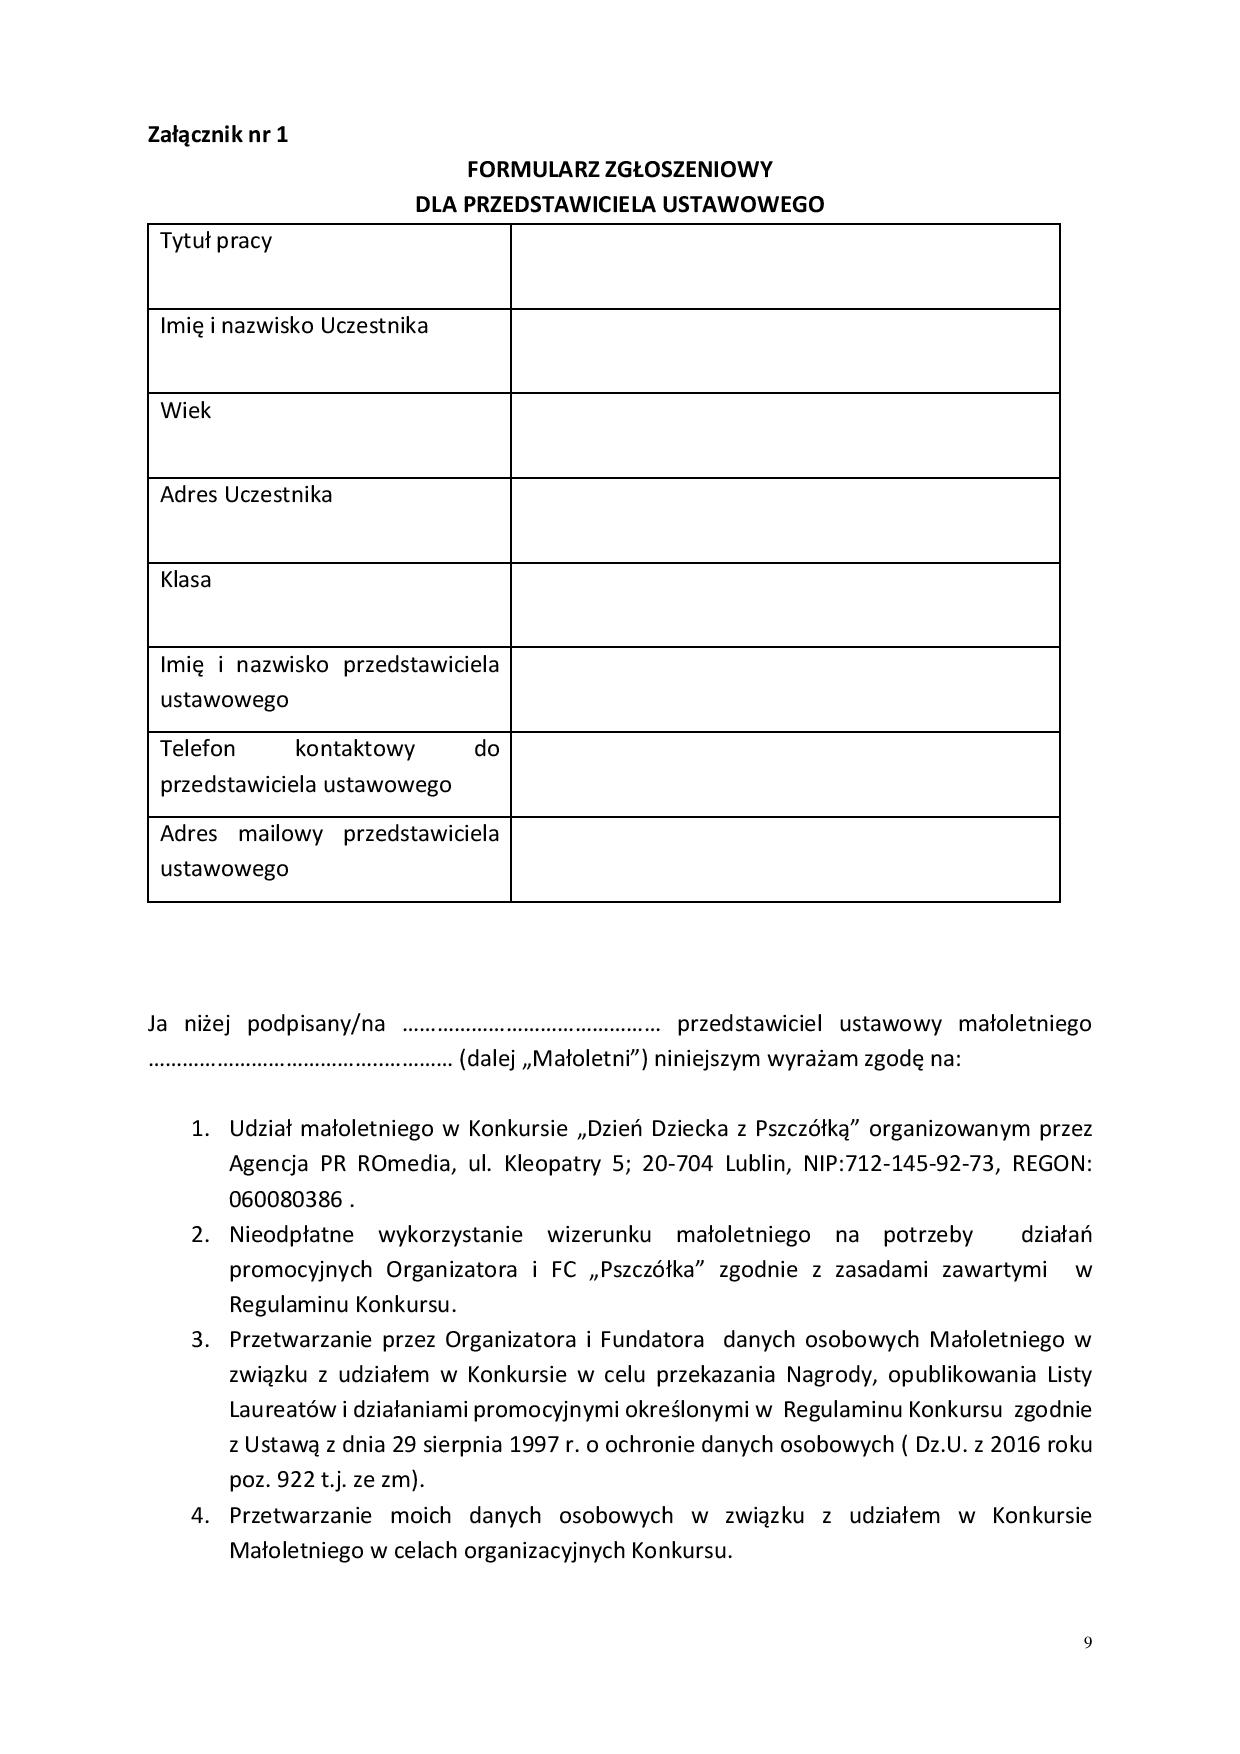 Document-page-009